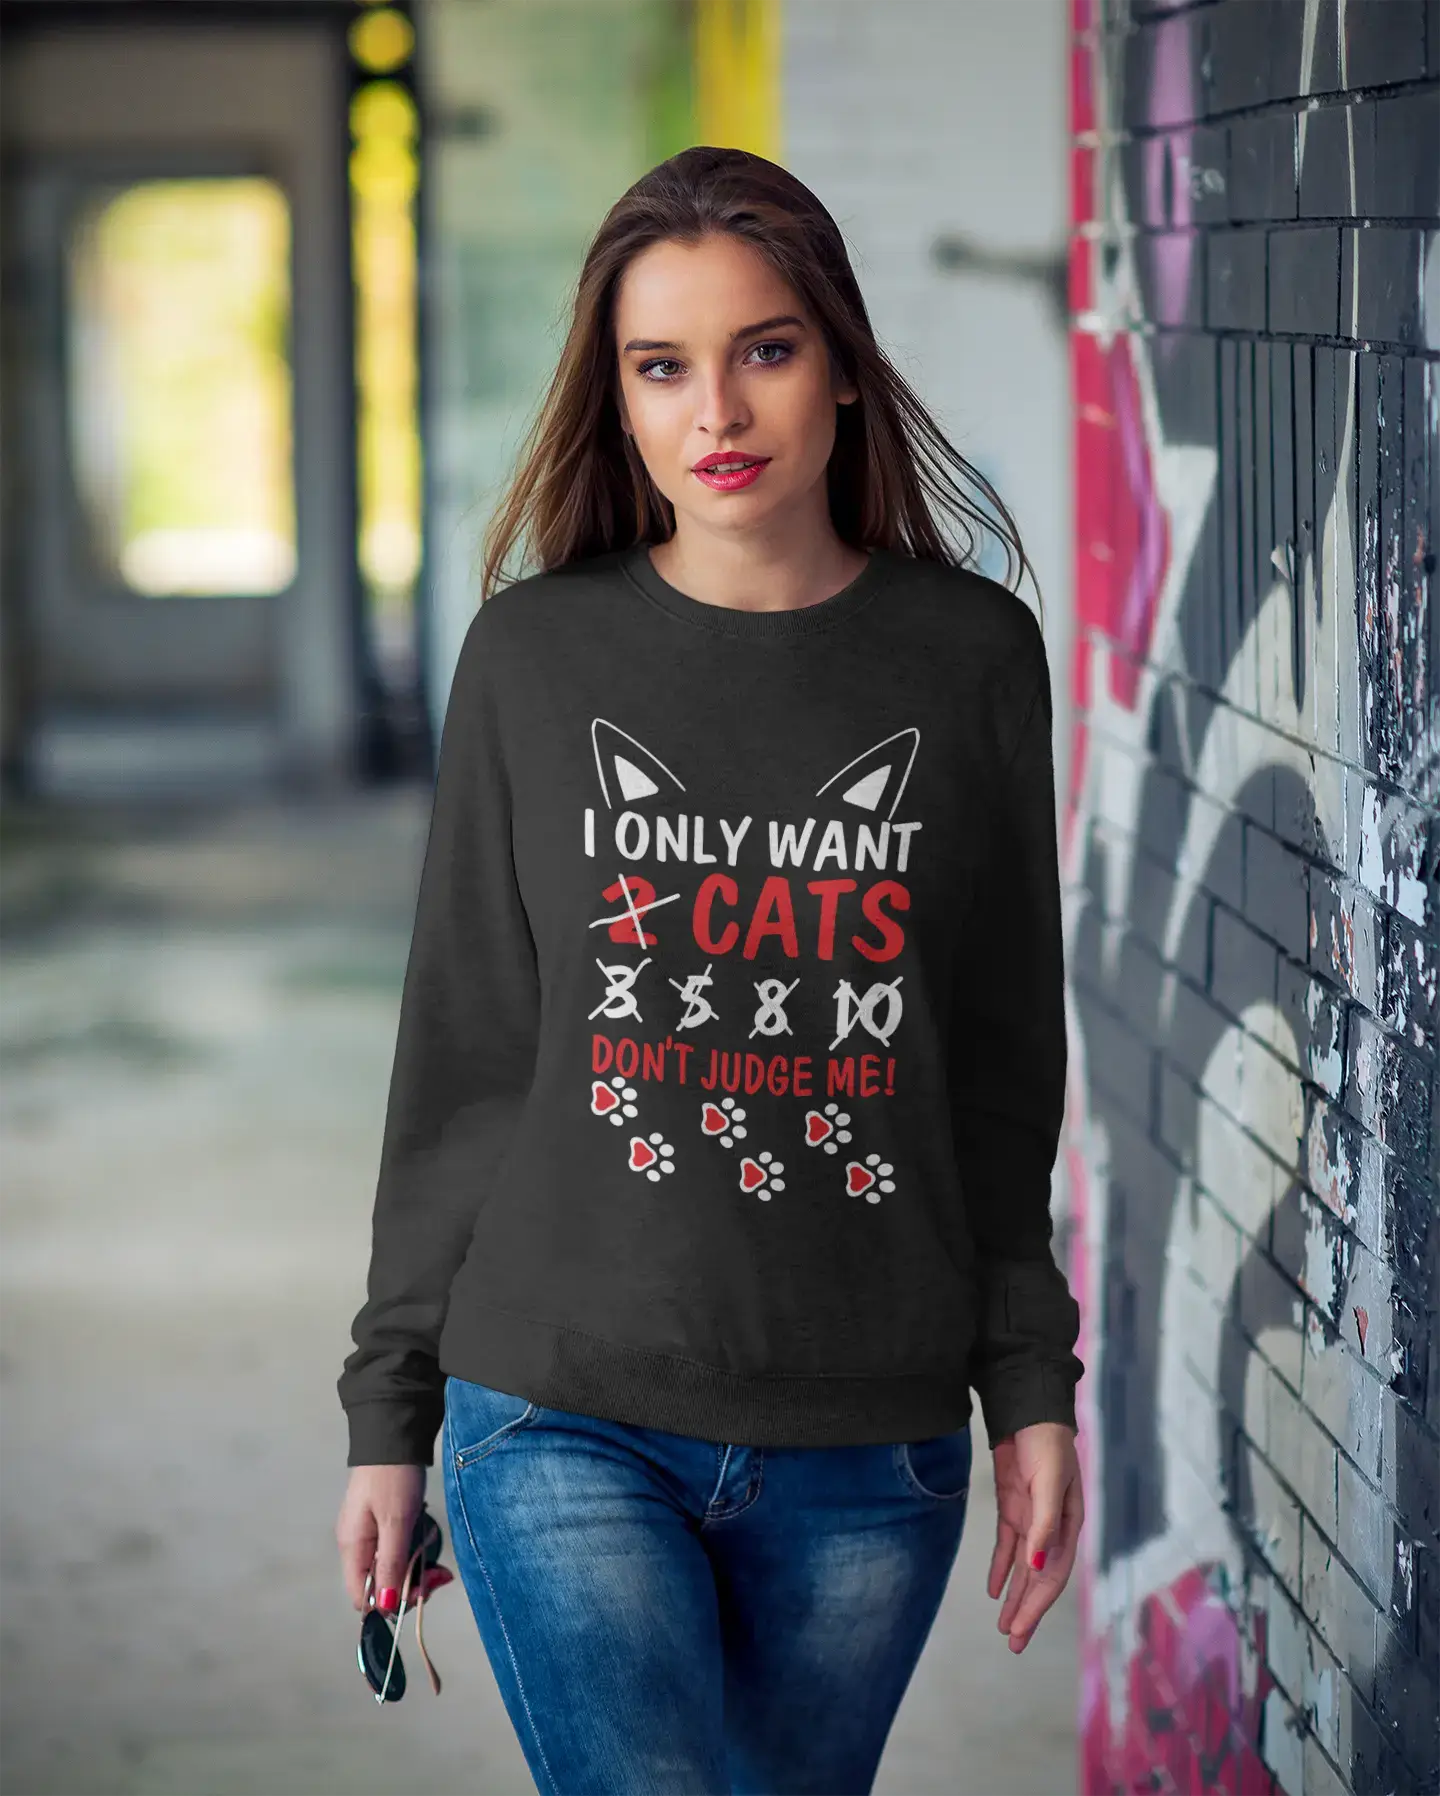 ULTRABASIC Women's Sweatshirt I Only Want Cats Don't Judge Me - Funny Cat Kitty Lover Sweater